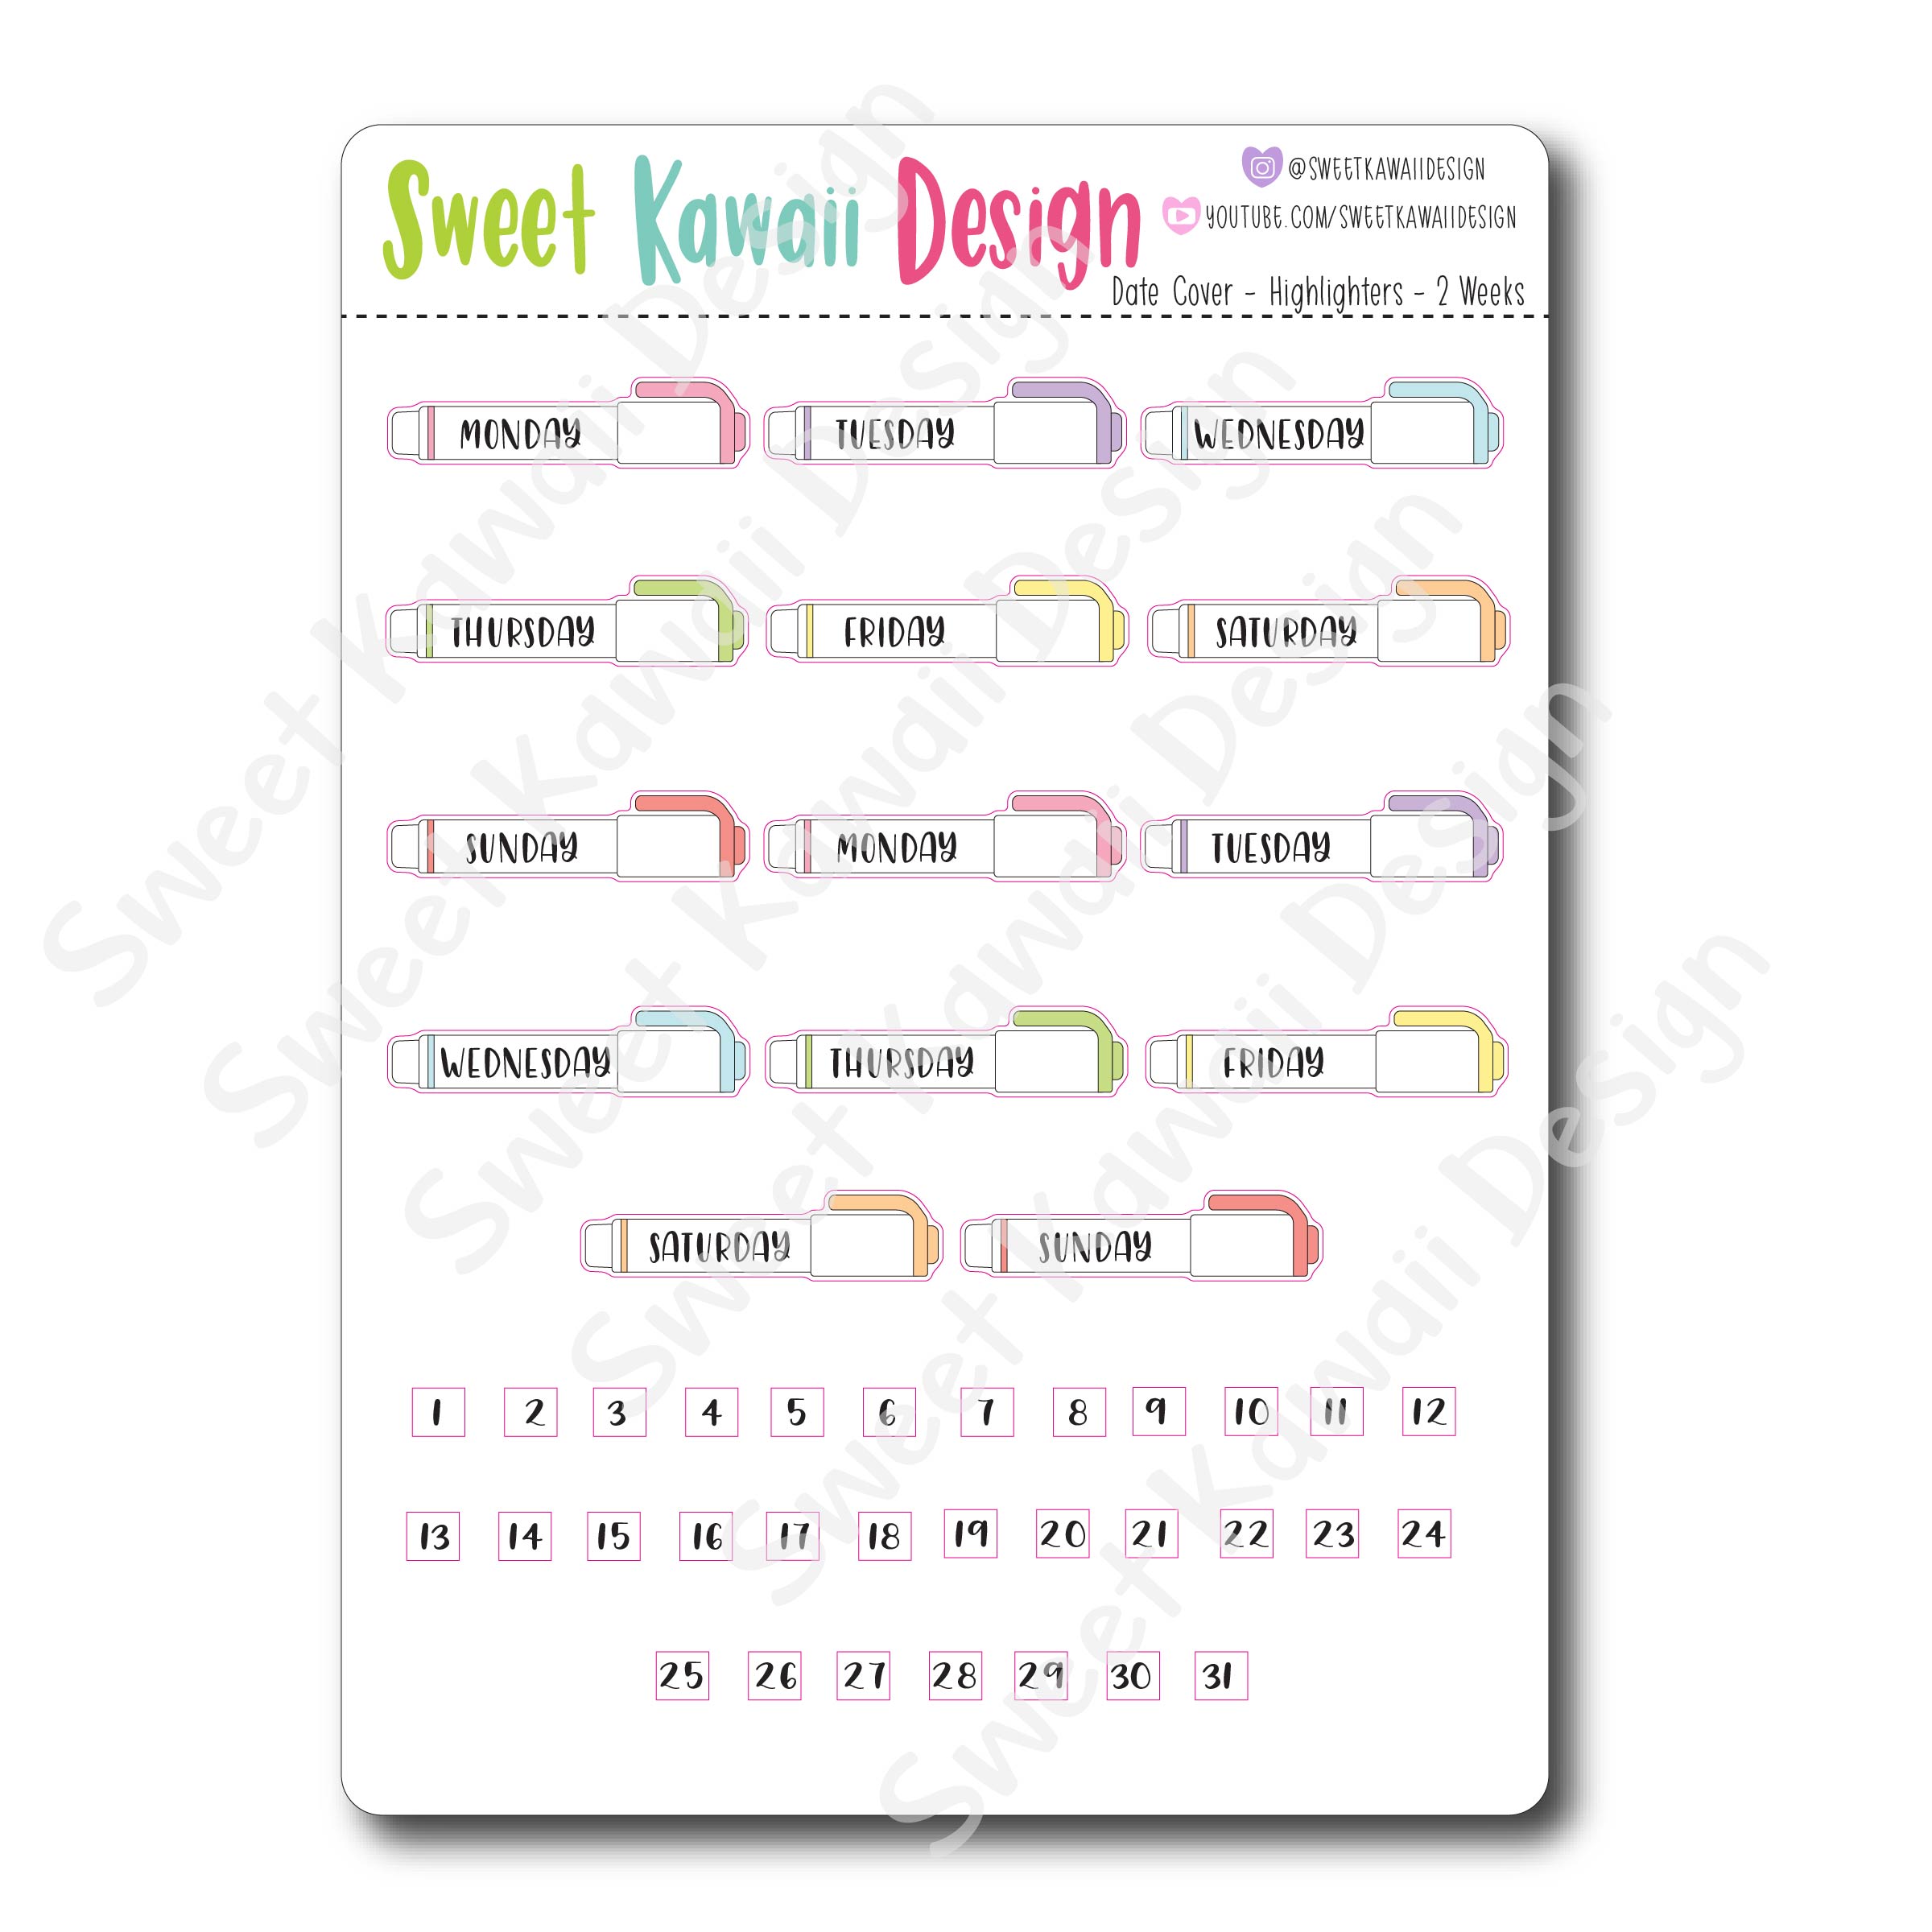 Kawaii Date Cover Stickers - Highlighters